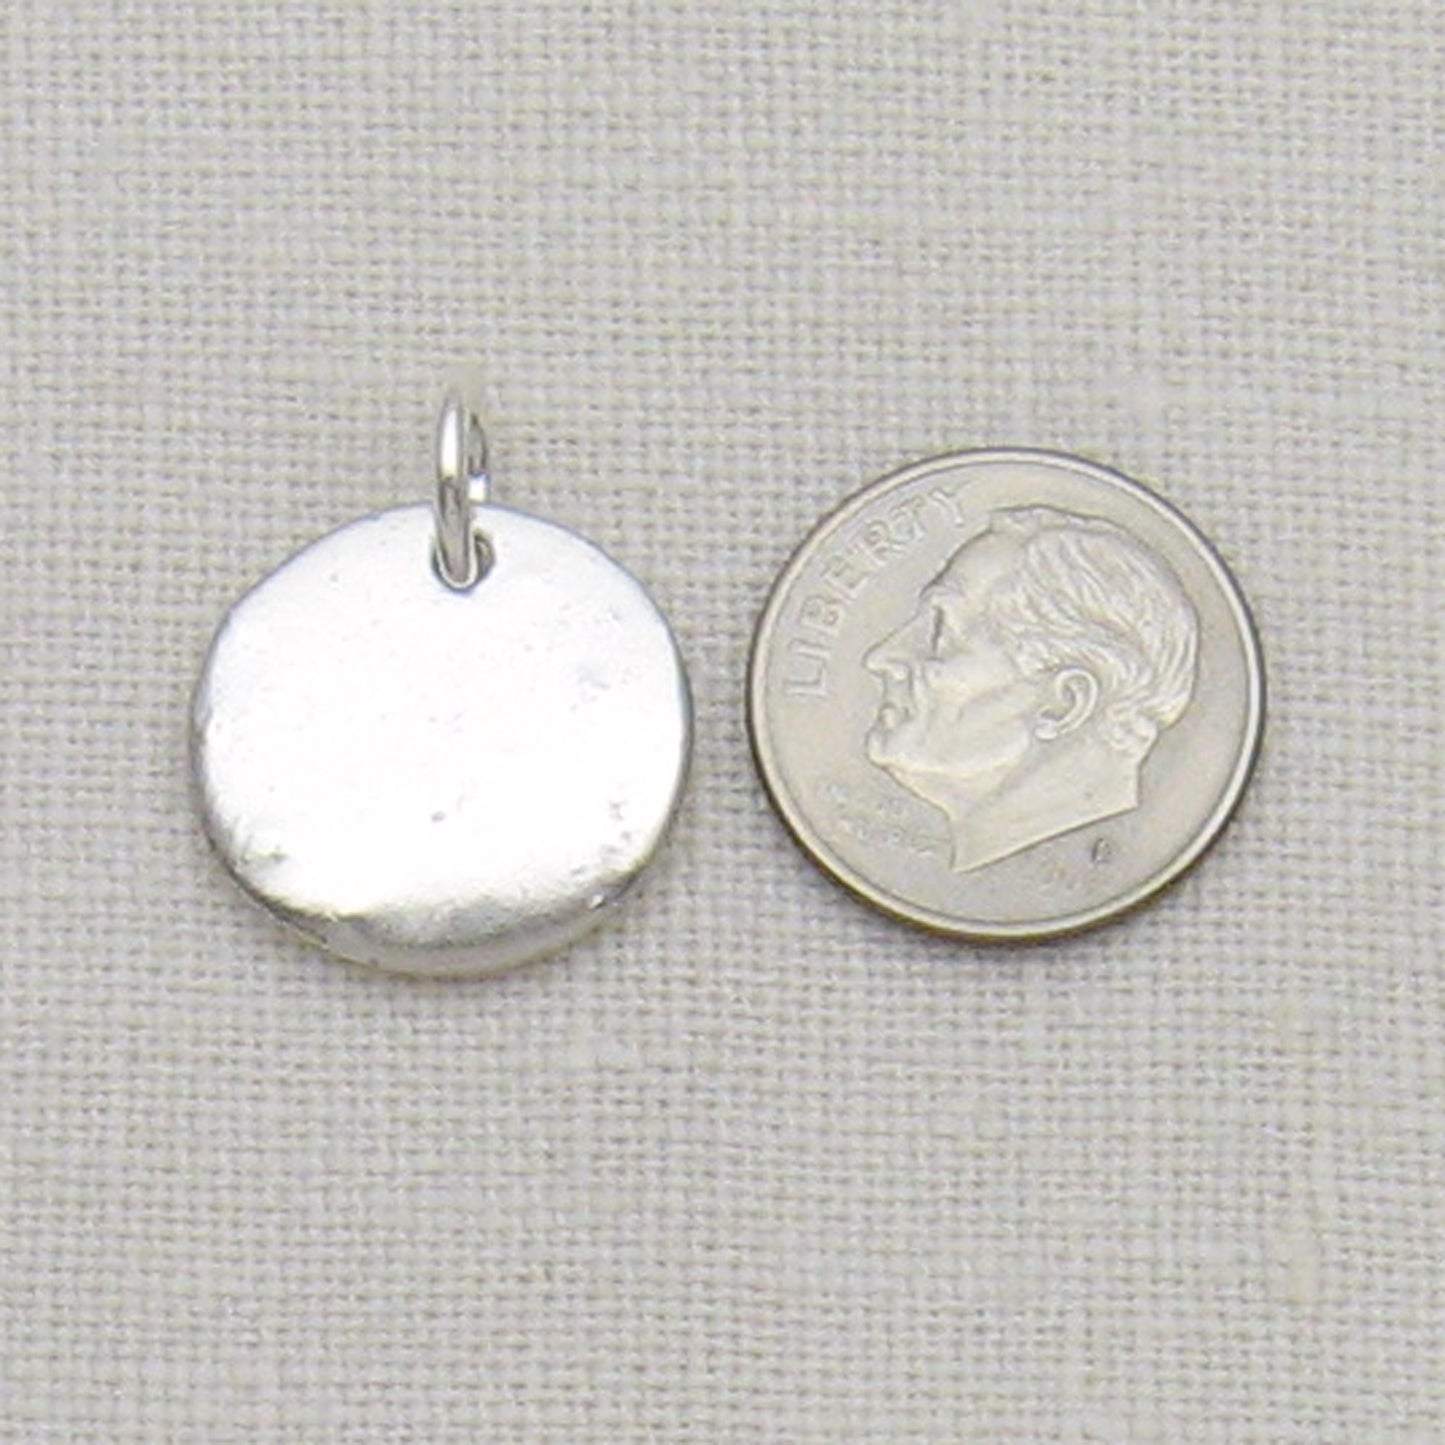 Five Eighths Inch Circle Cremation Ashes Pendant back & Size Reference